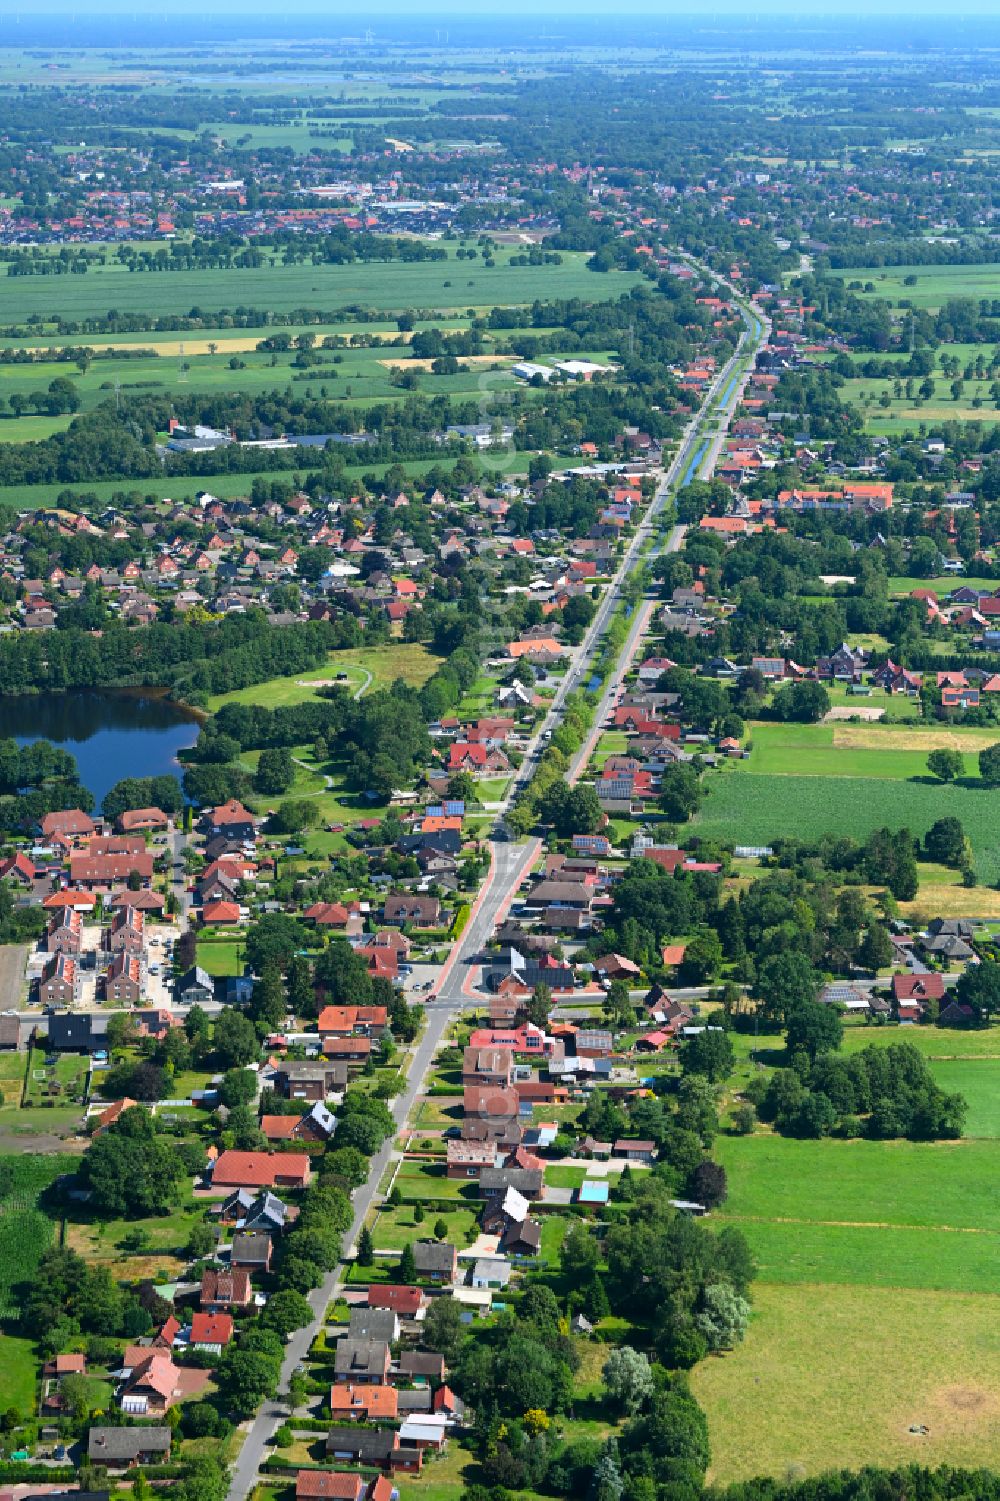 Klostermoor from the bird's eye view: Urban area with outskirts and inner city area on the edge of agricultural fields and arable land in Klostermoor in the state Lower Saxony, Germany